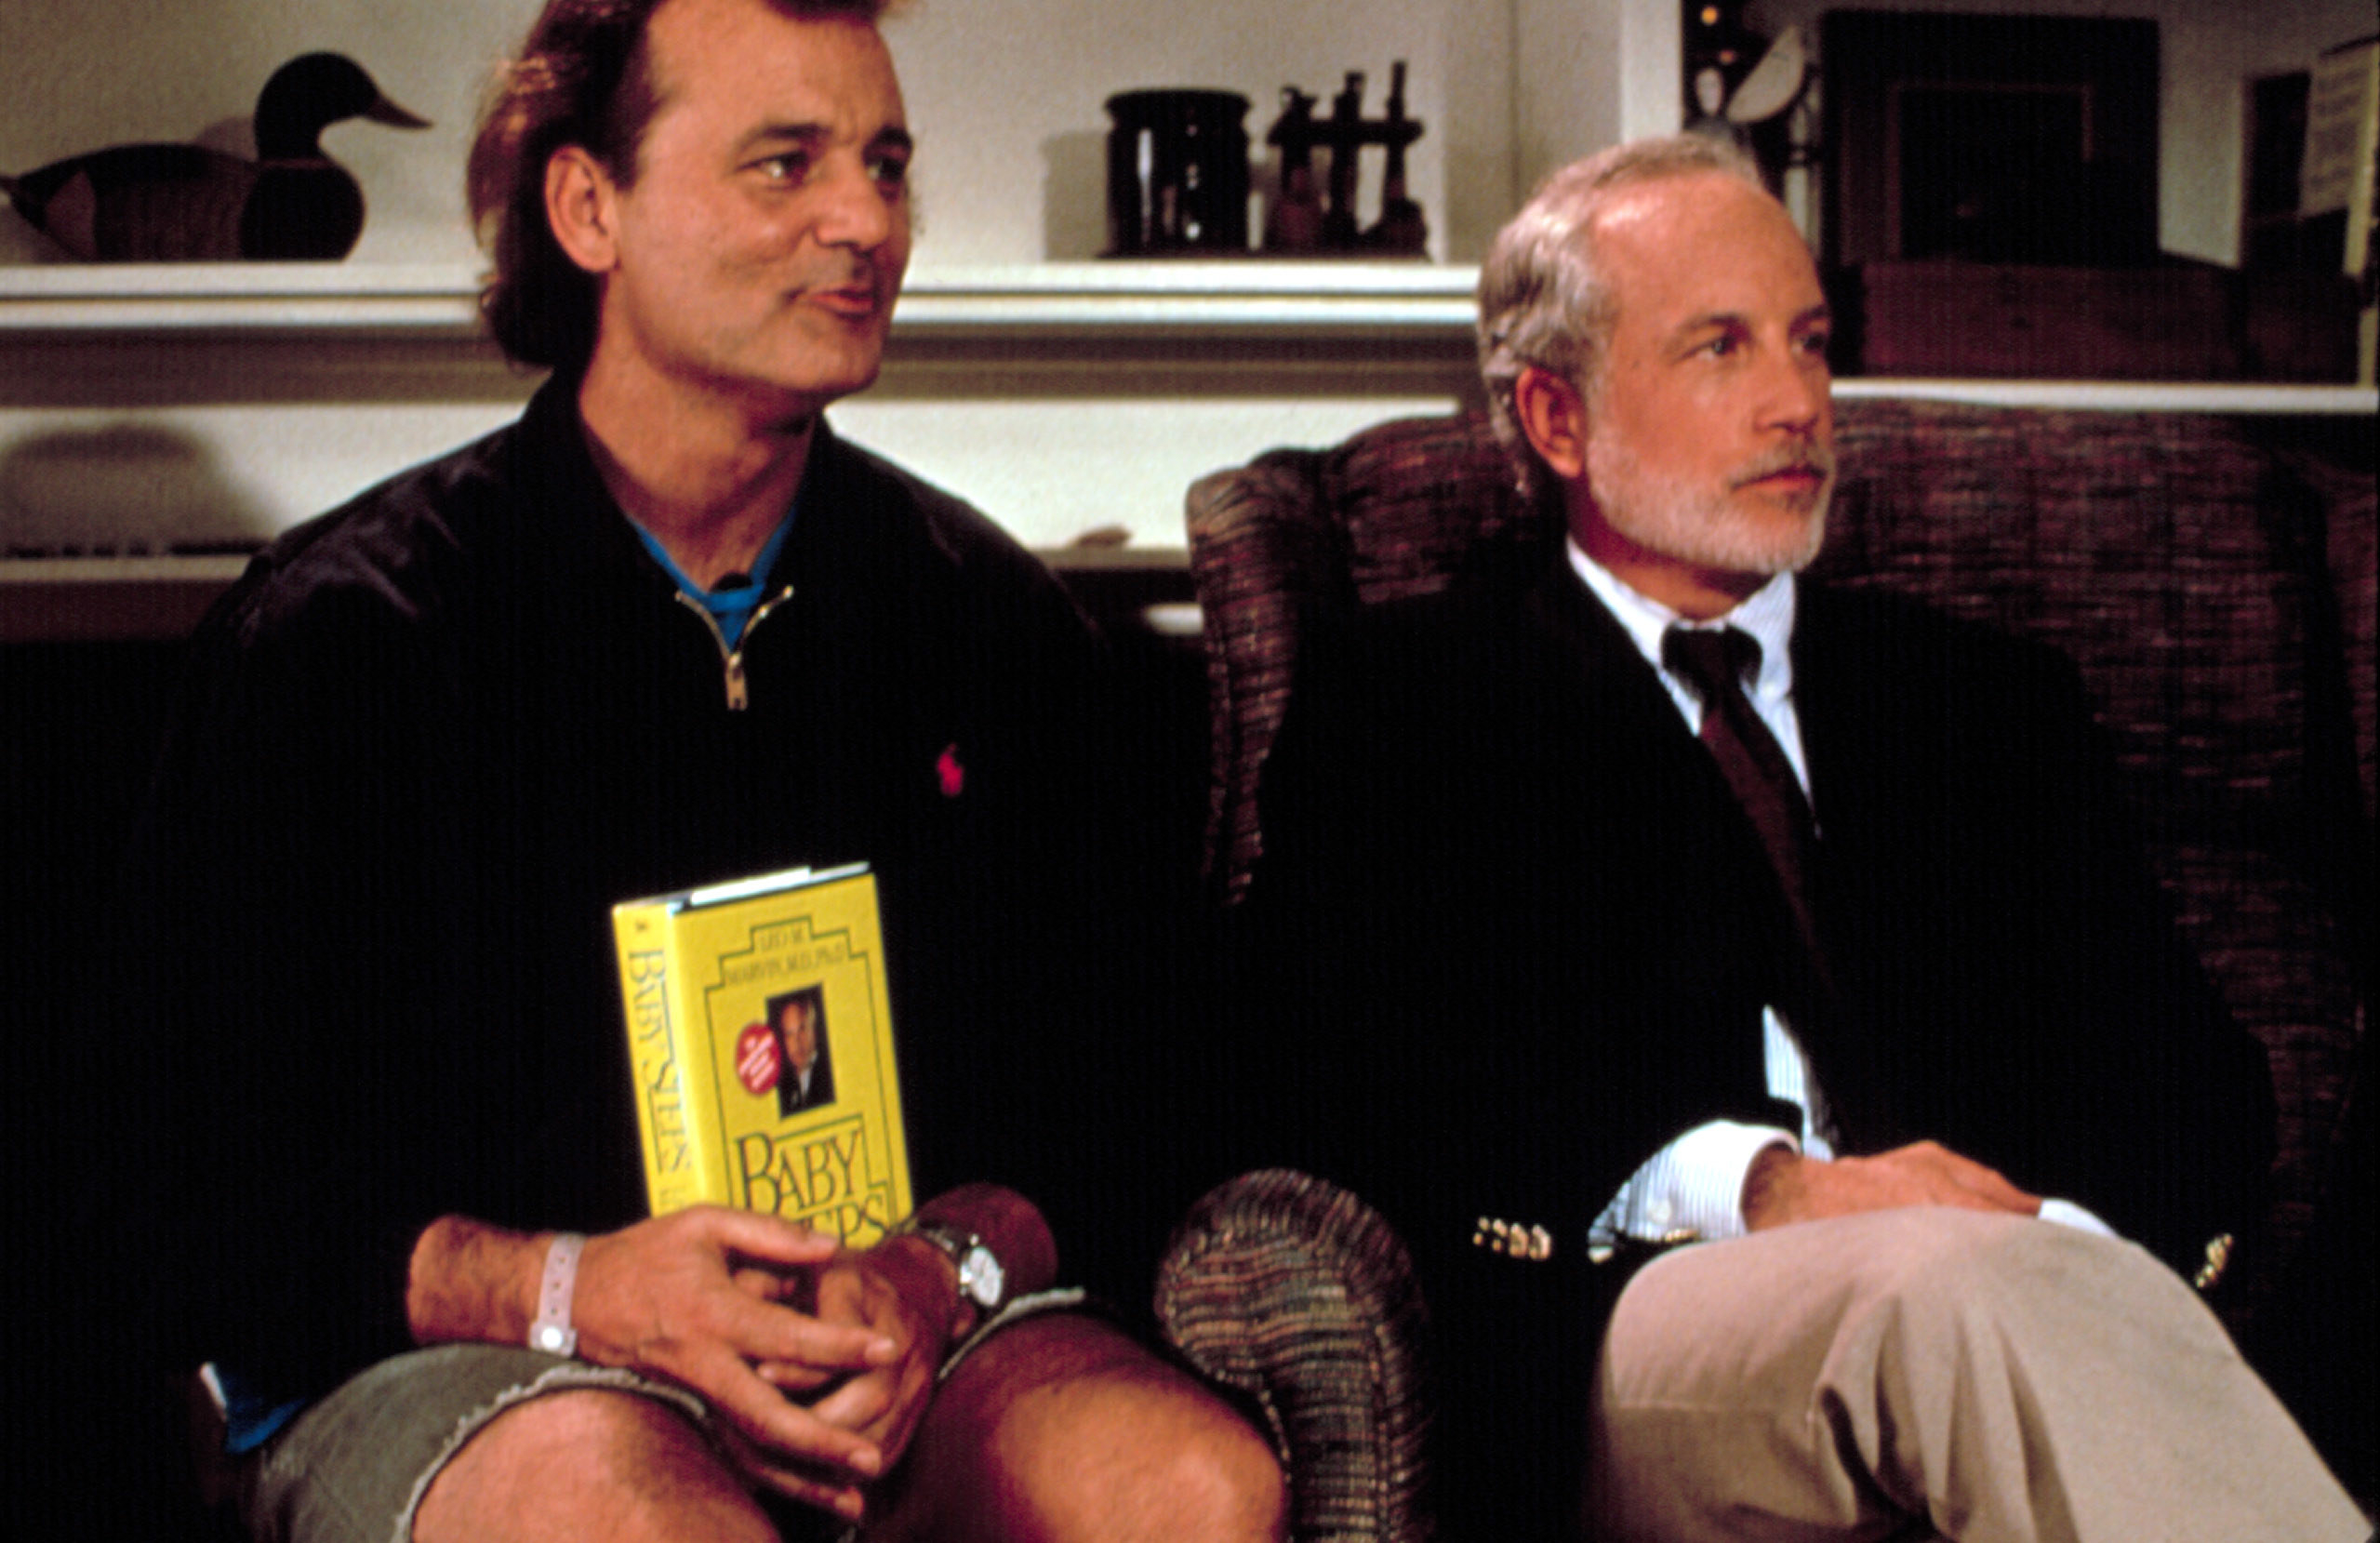 Bill Murray holding a book while Richard Dreyfuss looks nonplussed